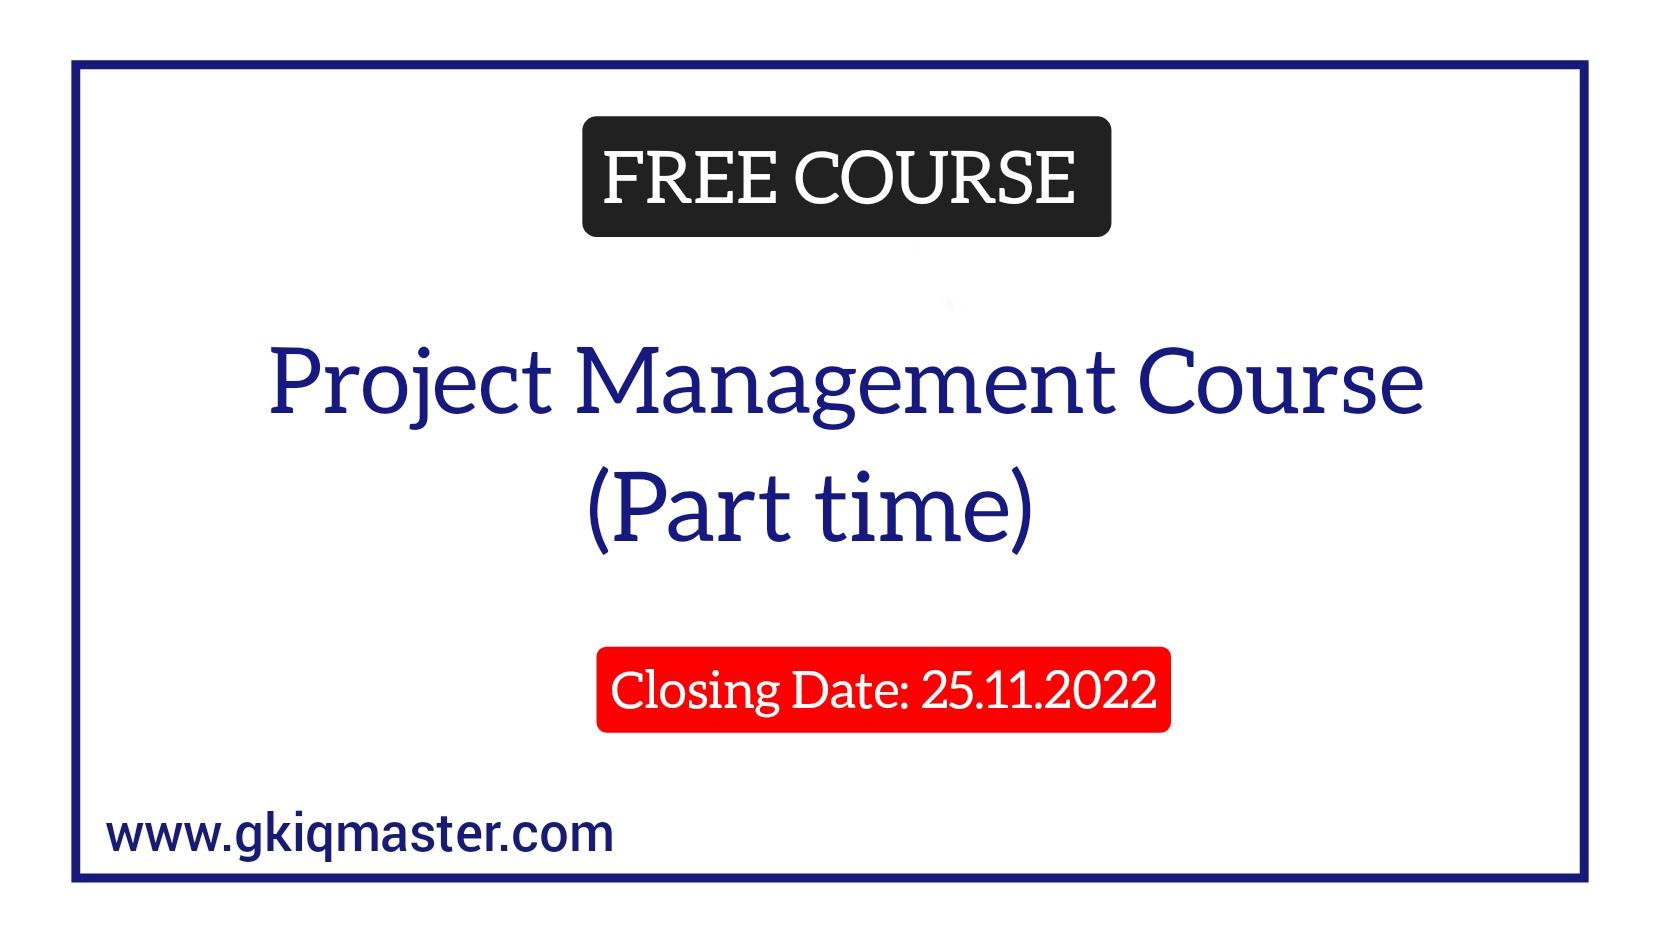 Project Management Course - Free Scholarship